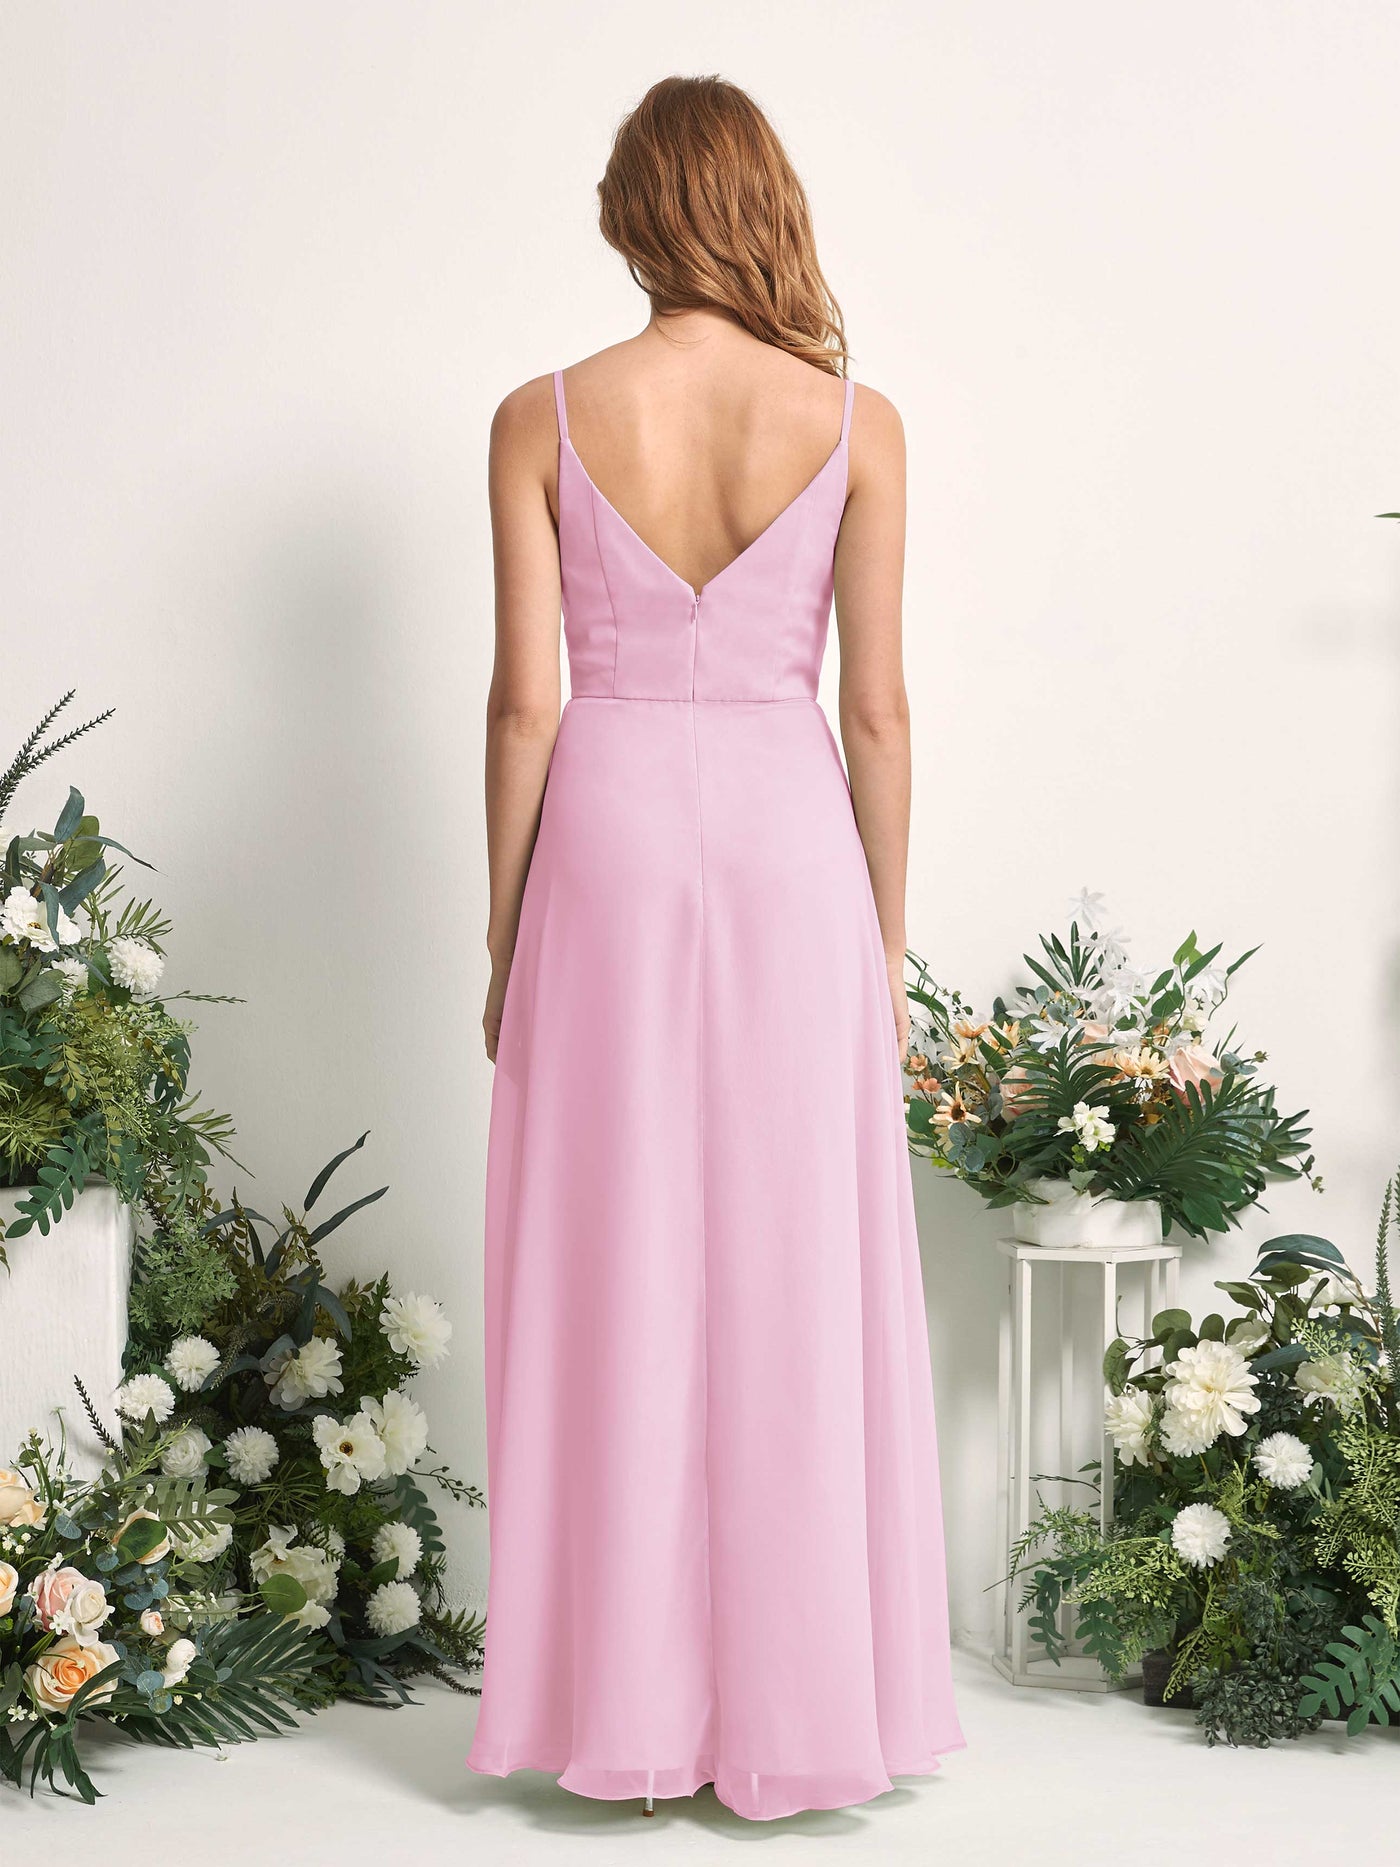 Bridesmaid Dress A-line Chiffon Spaghetti-straps Full Length Sleeveless Wedding Party Dress - Candy Pink (81227239)#color_candy-pink